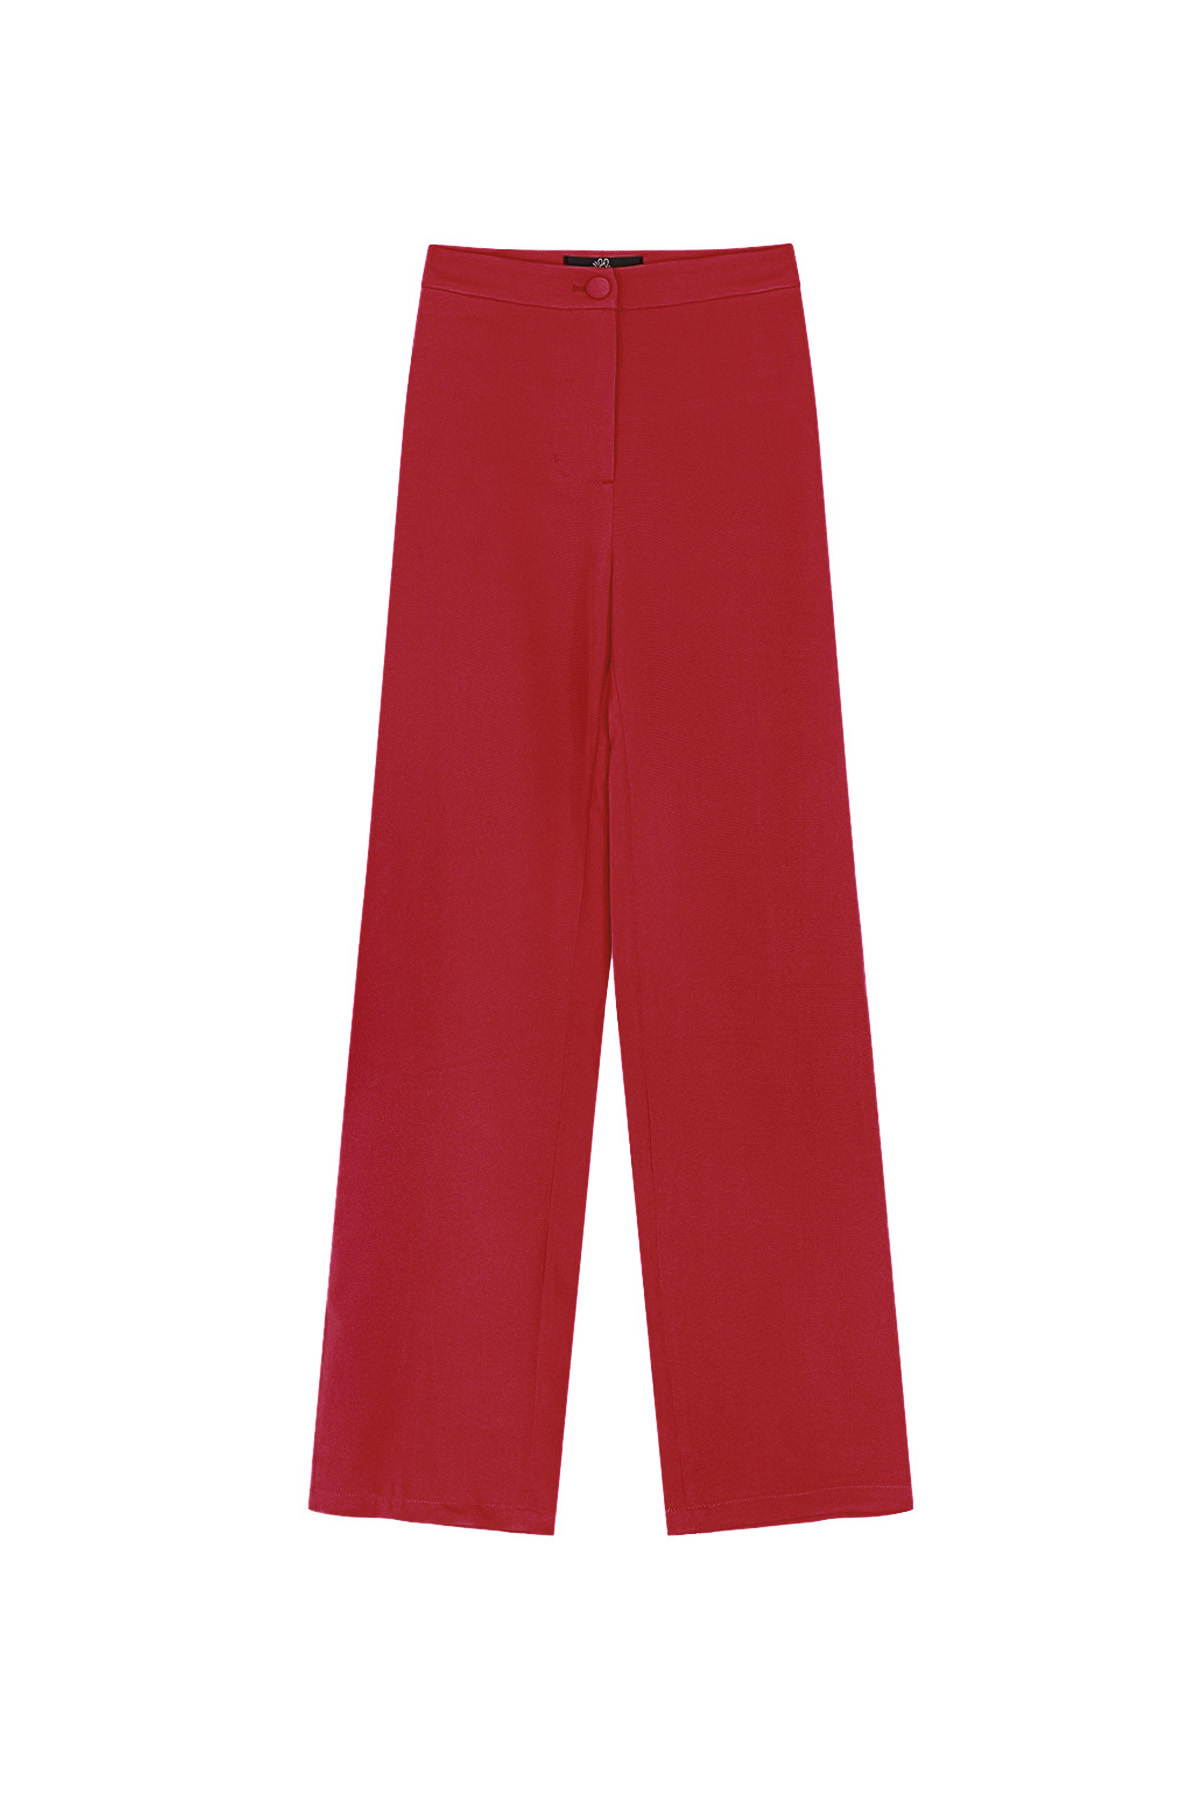 Basic plain trousers - red